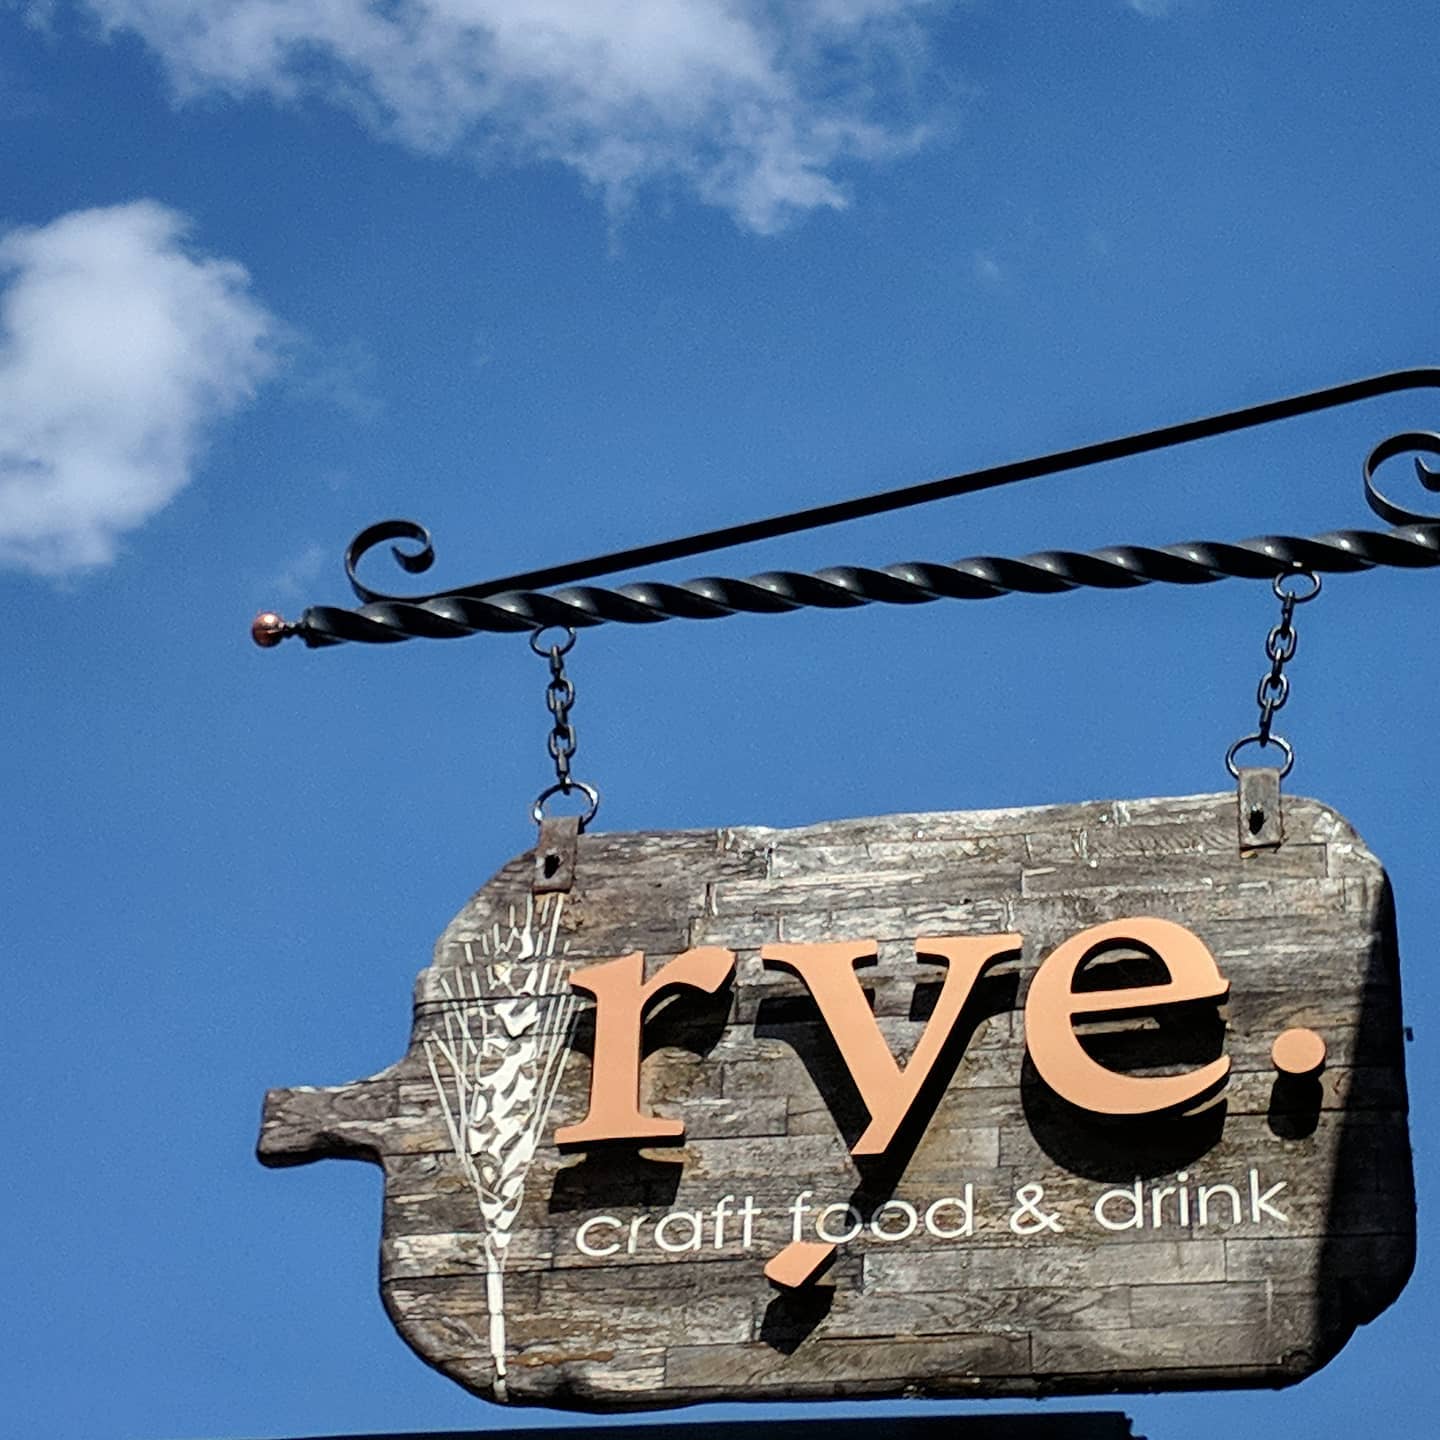 A wooden sign shaped like a jug hangs from chains. It reads: “Rye. Craft food and drink” in faded orange and white letters.